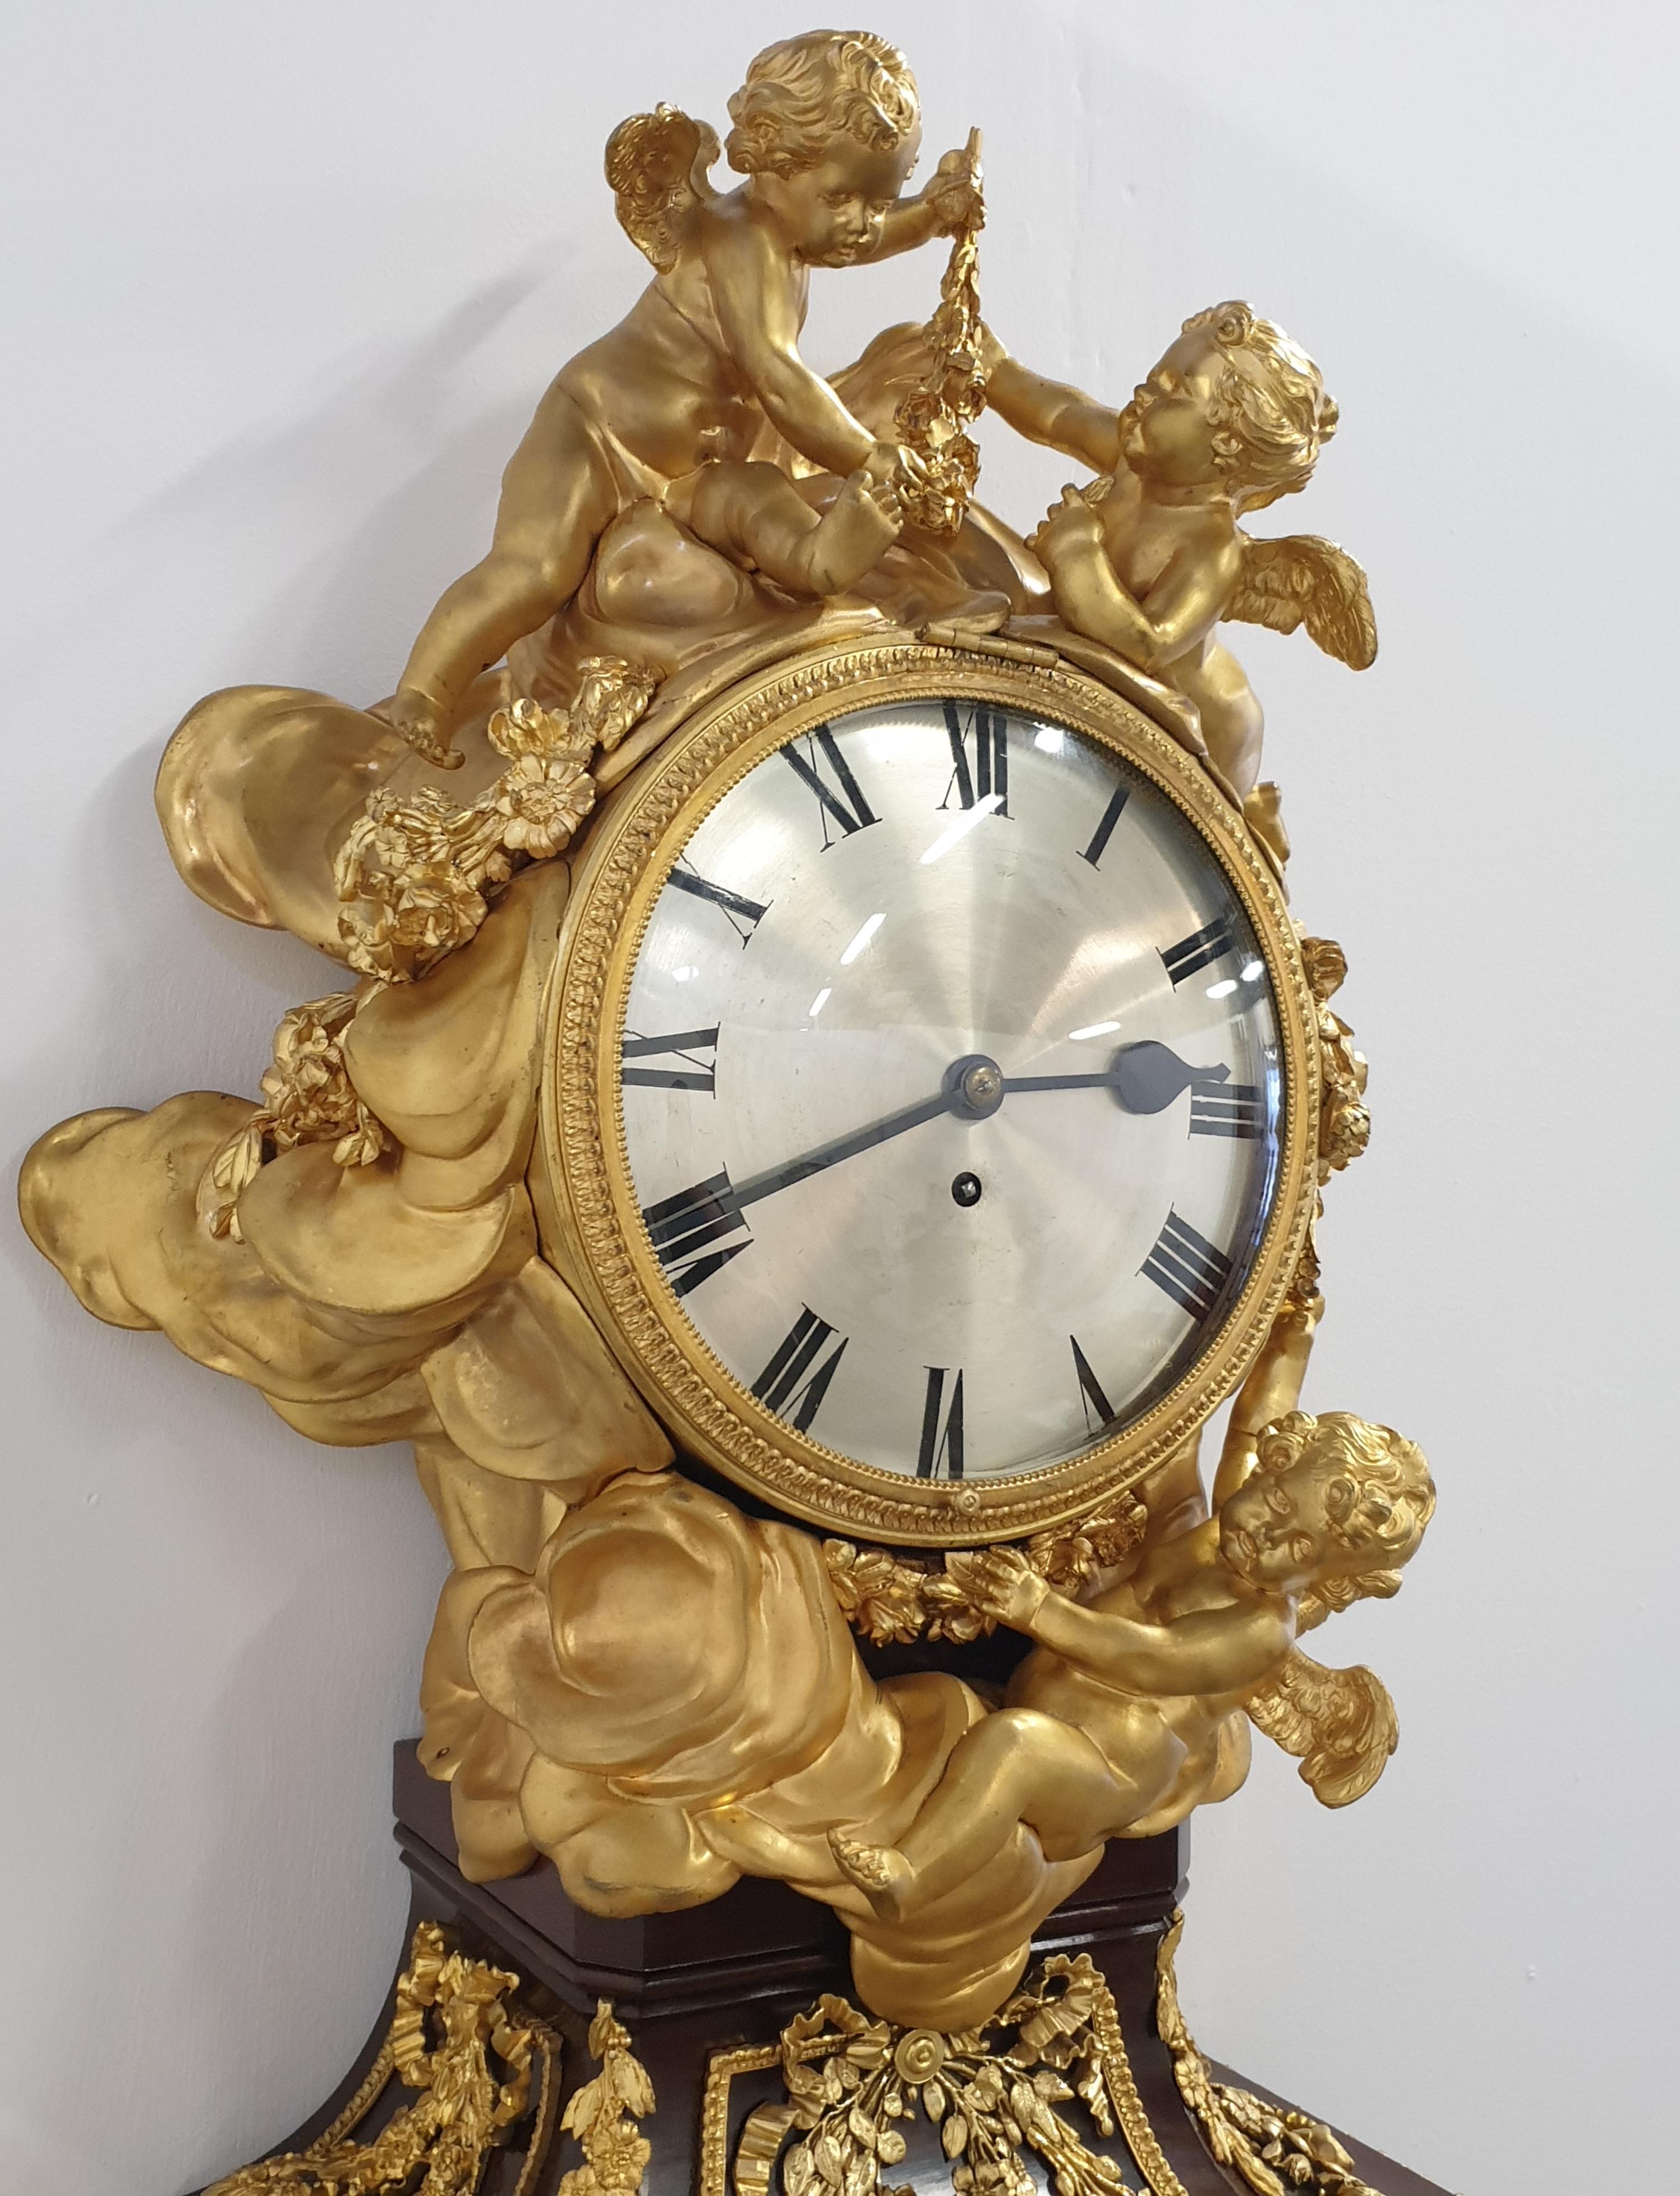 19th Century regulator clock in style of Louis XVI, after Jean-Henri Riesener. With André-Charles Boulle (1642–1732) and Charles Cressent (1685–1768), Riesener was arguably one of the three greatest French ébénistes of the 18th century. Eventually